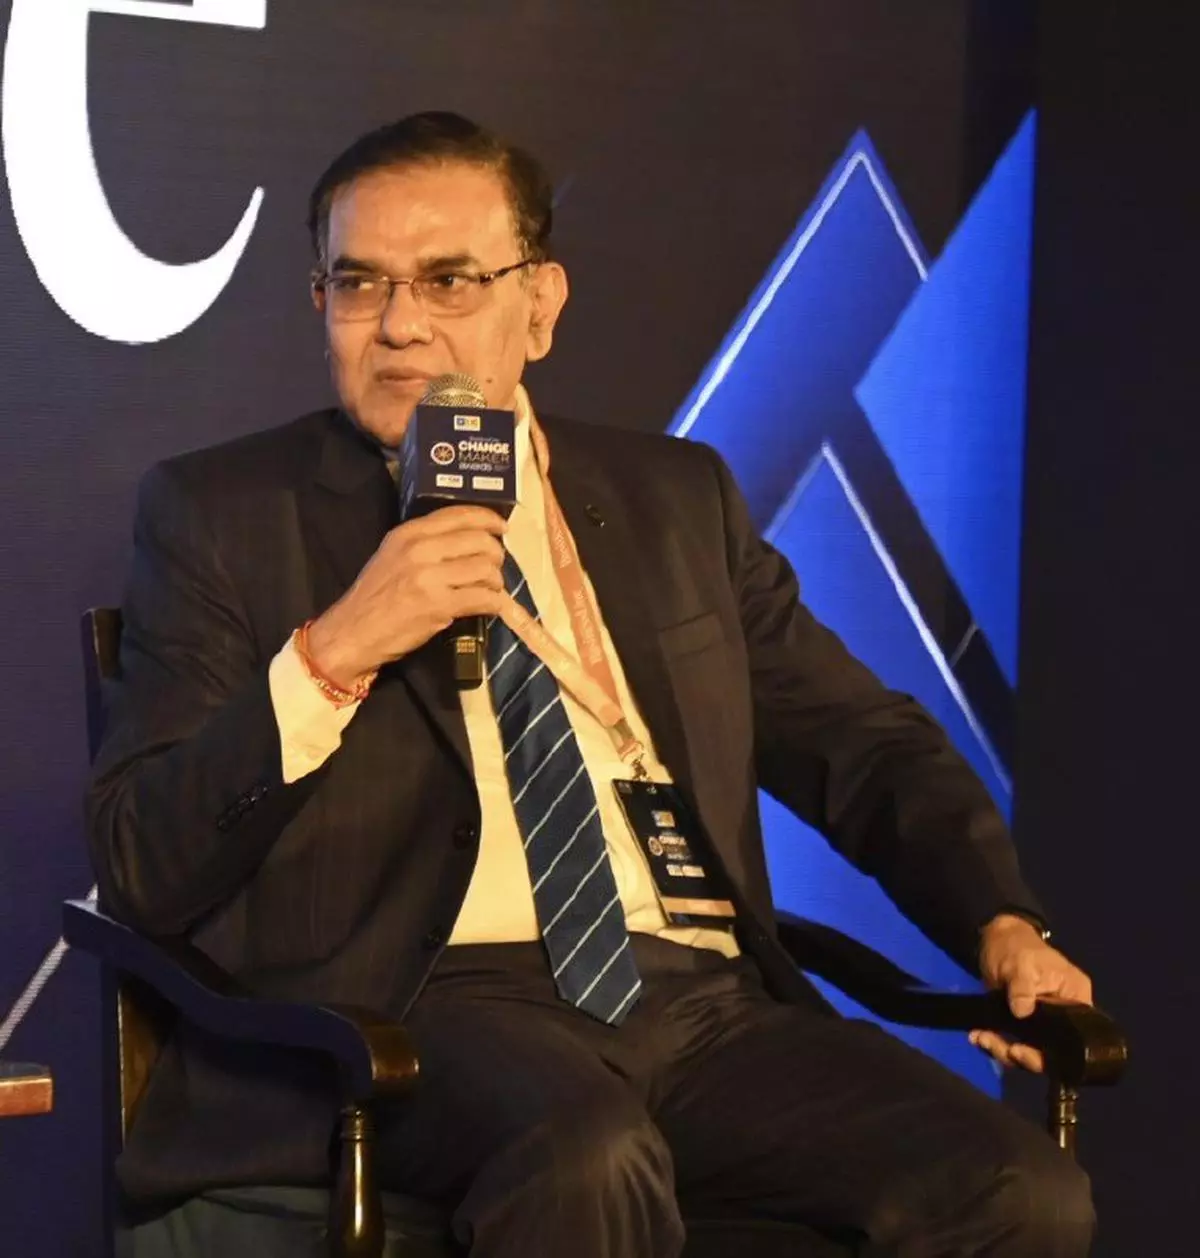 The BLChangemaker Awards Ceremony kickstarted with a fireside chat on insurance with BC Patnaik, Managing Director, LIC